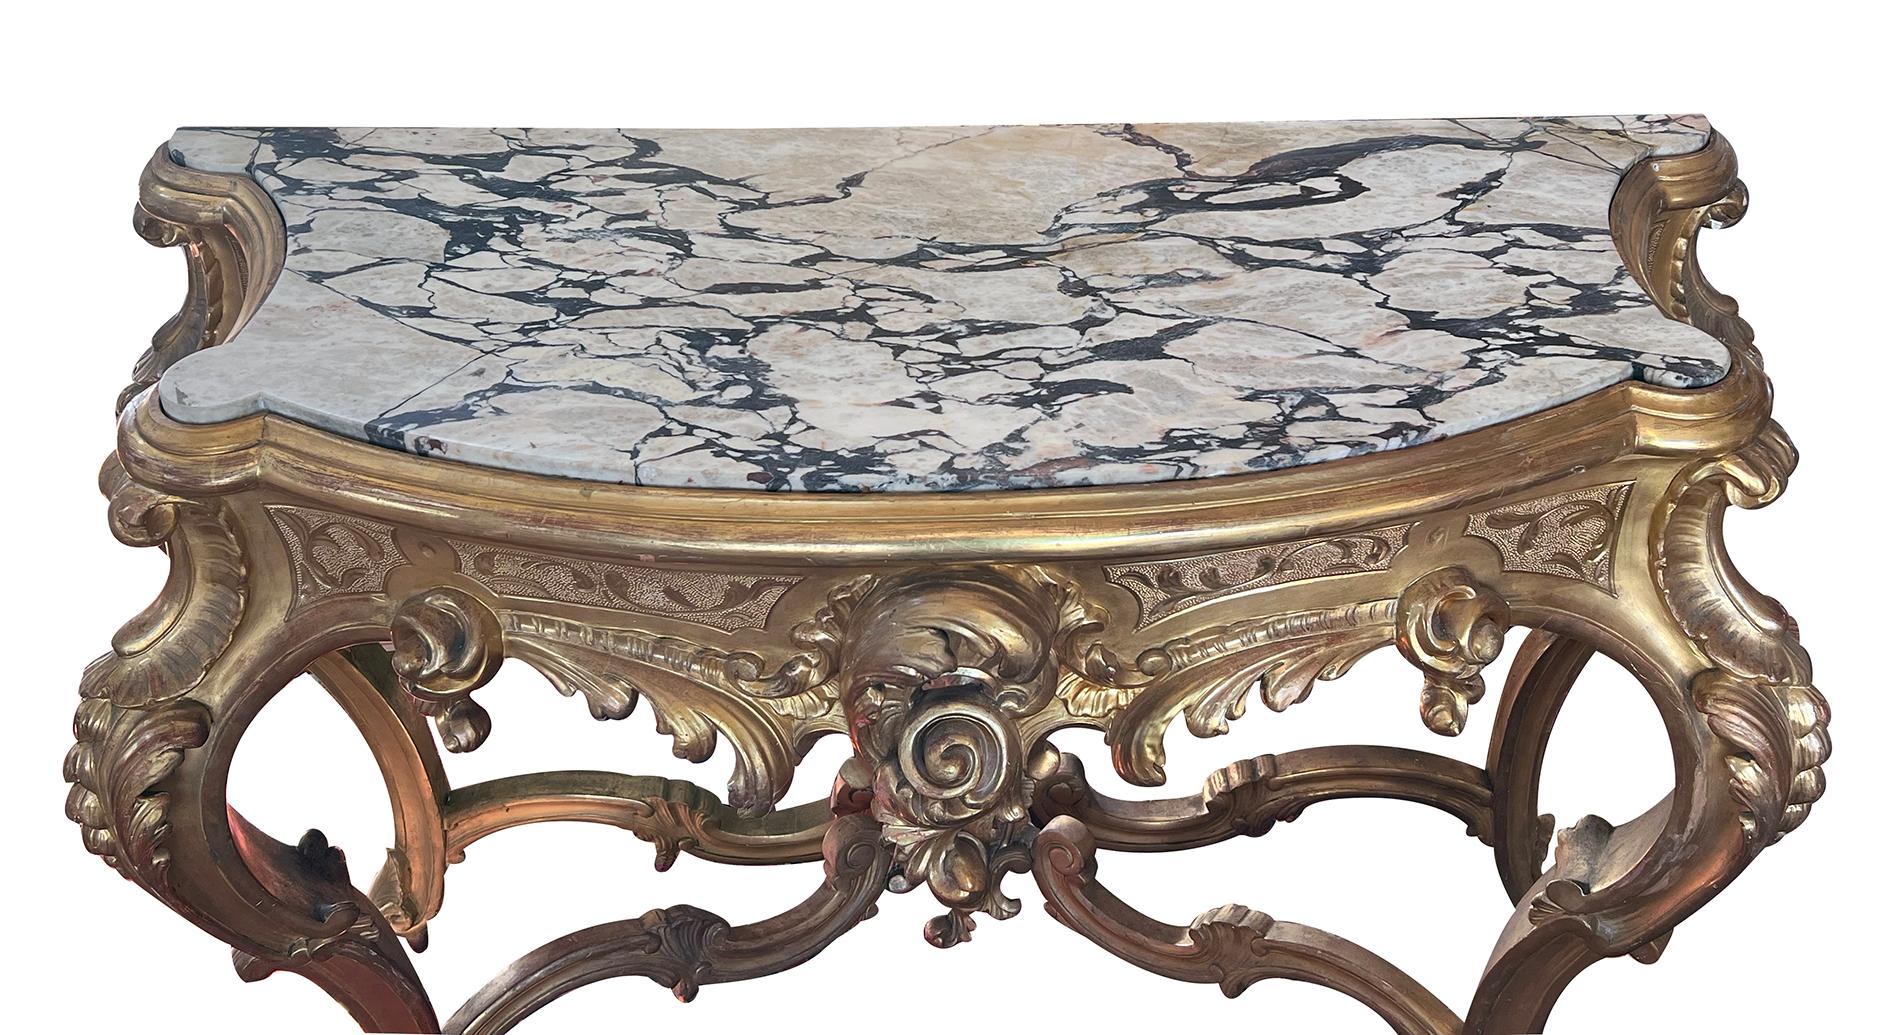 the Calacatta Viola marble top with bowed front and concave sides inset within an ogee molded edge; over a deep apron with rocaille and acanthus carving; raised on cabriole supports with similar rocaille and acanthus decoration with cascading bell